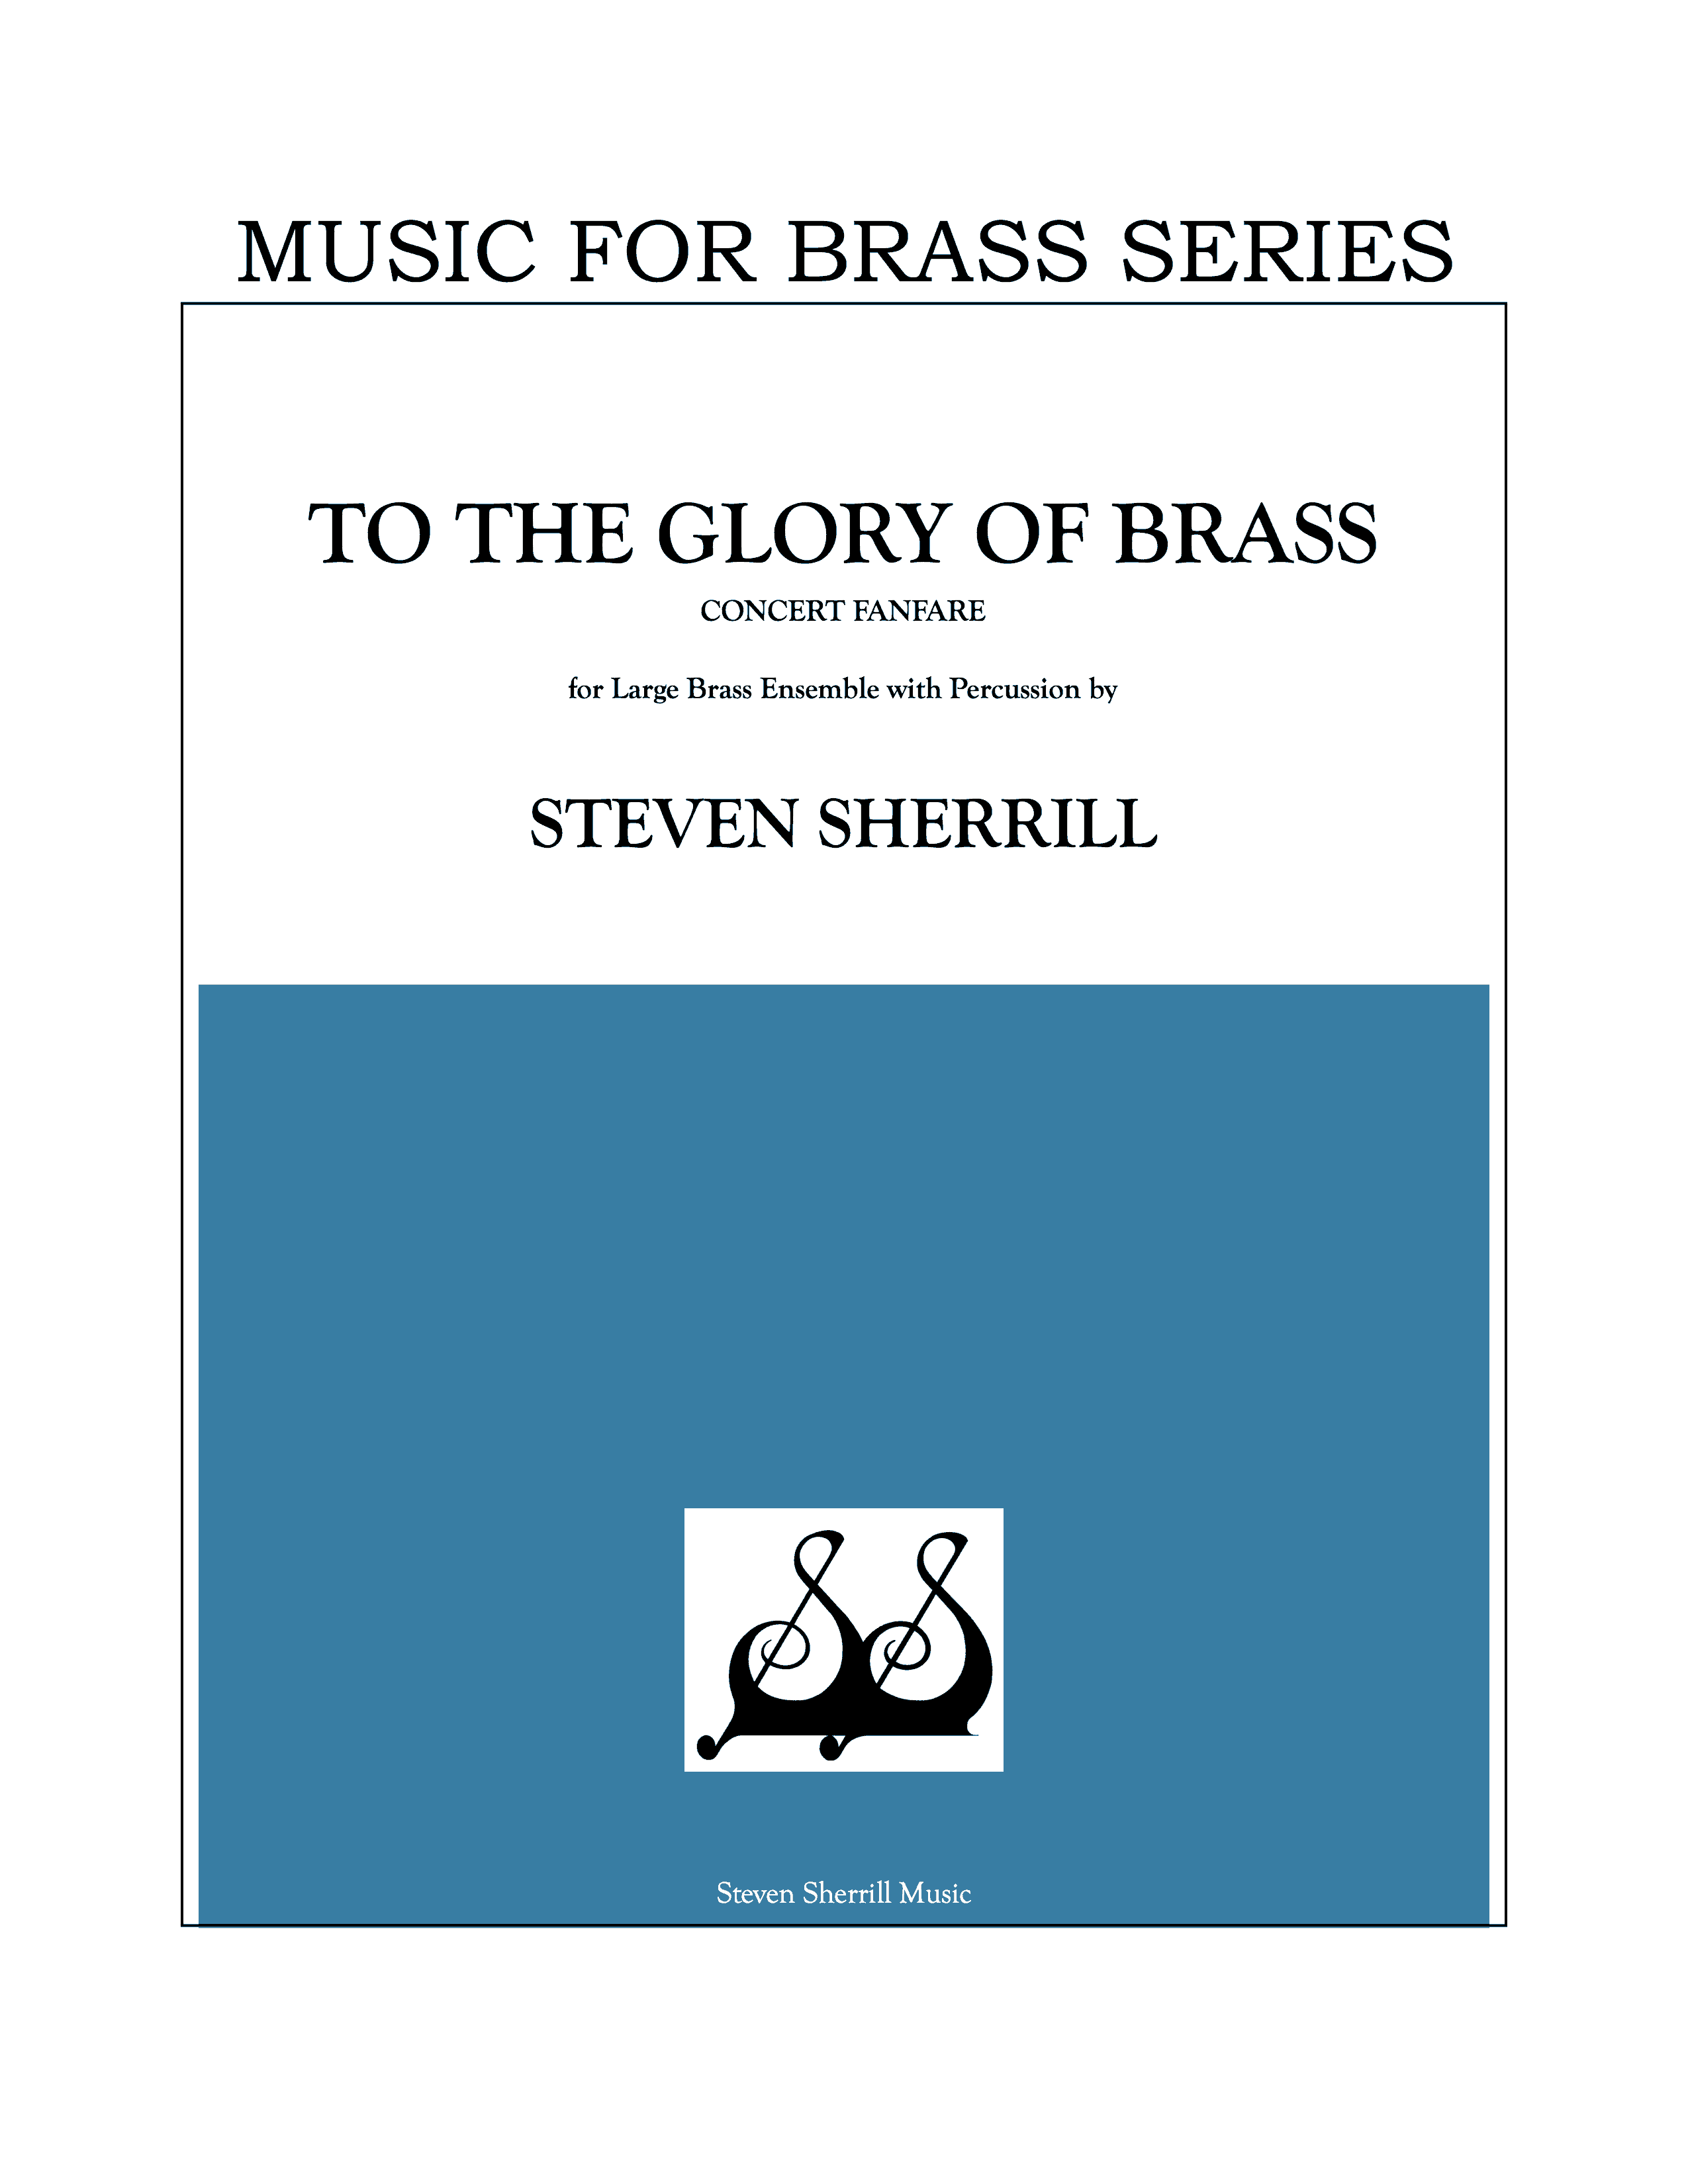 To the Glory of Brass cover page